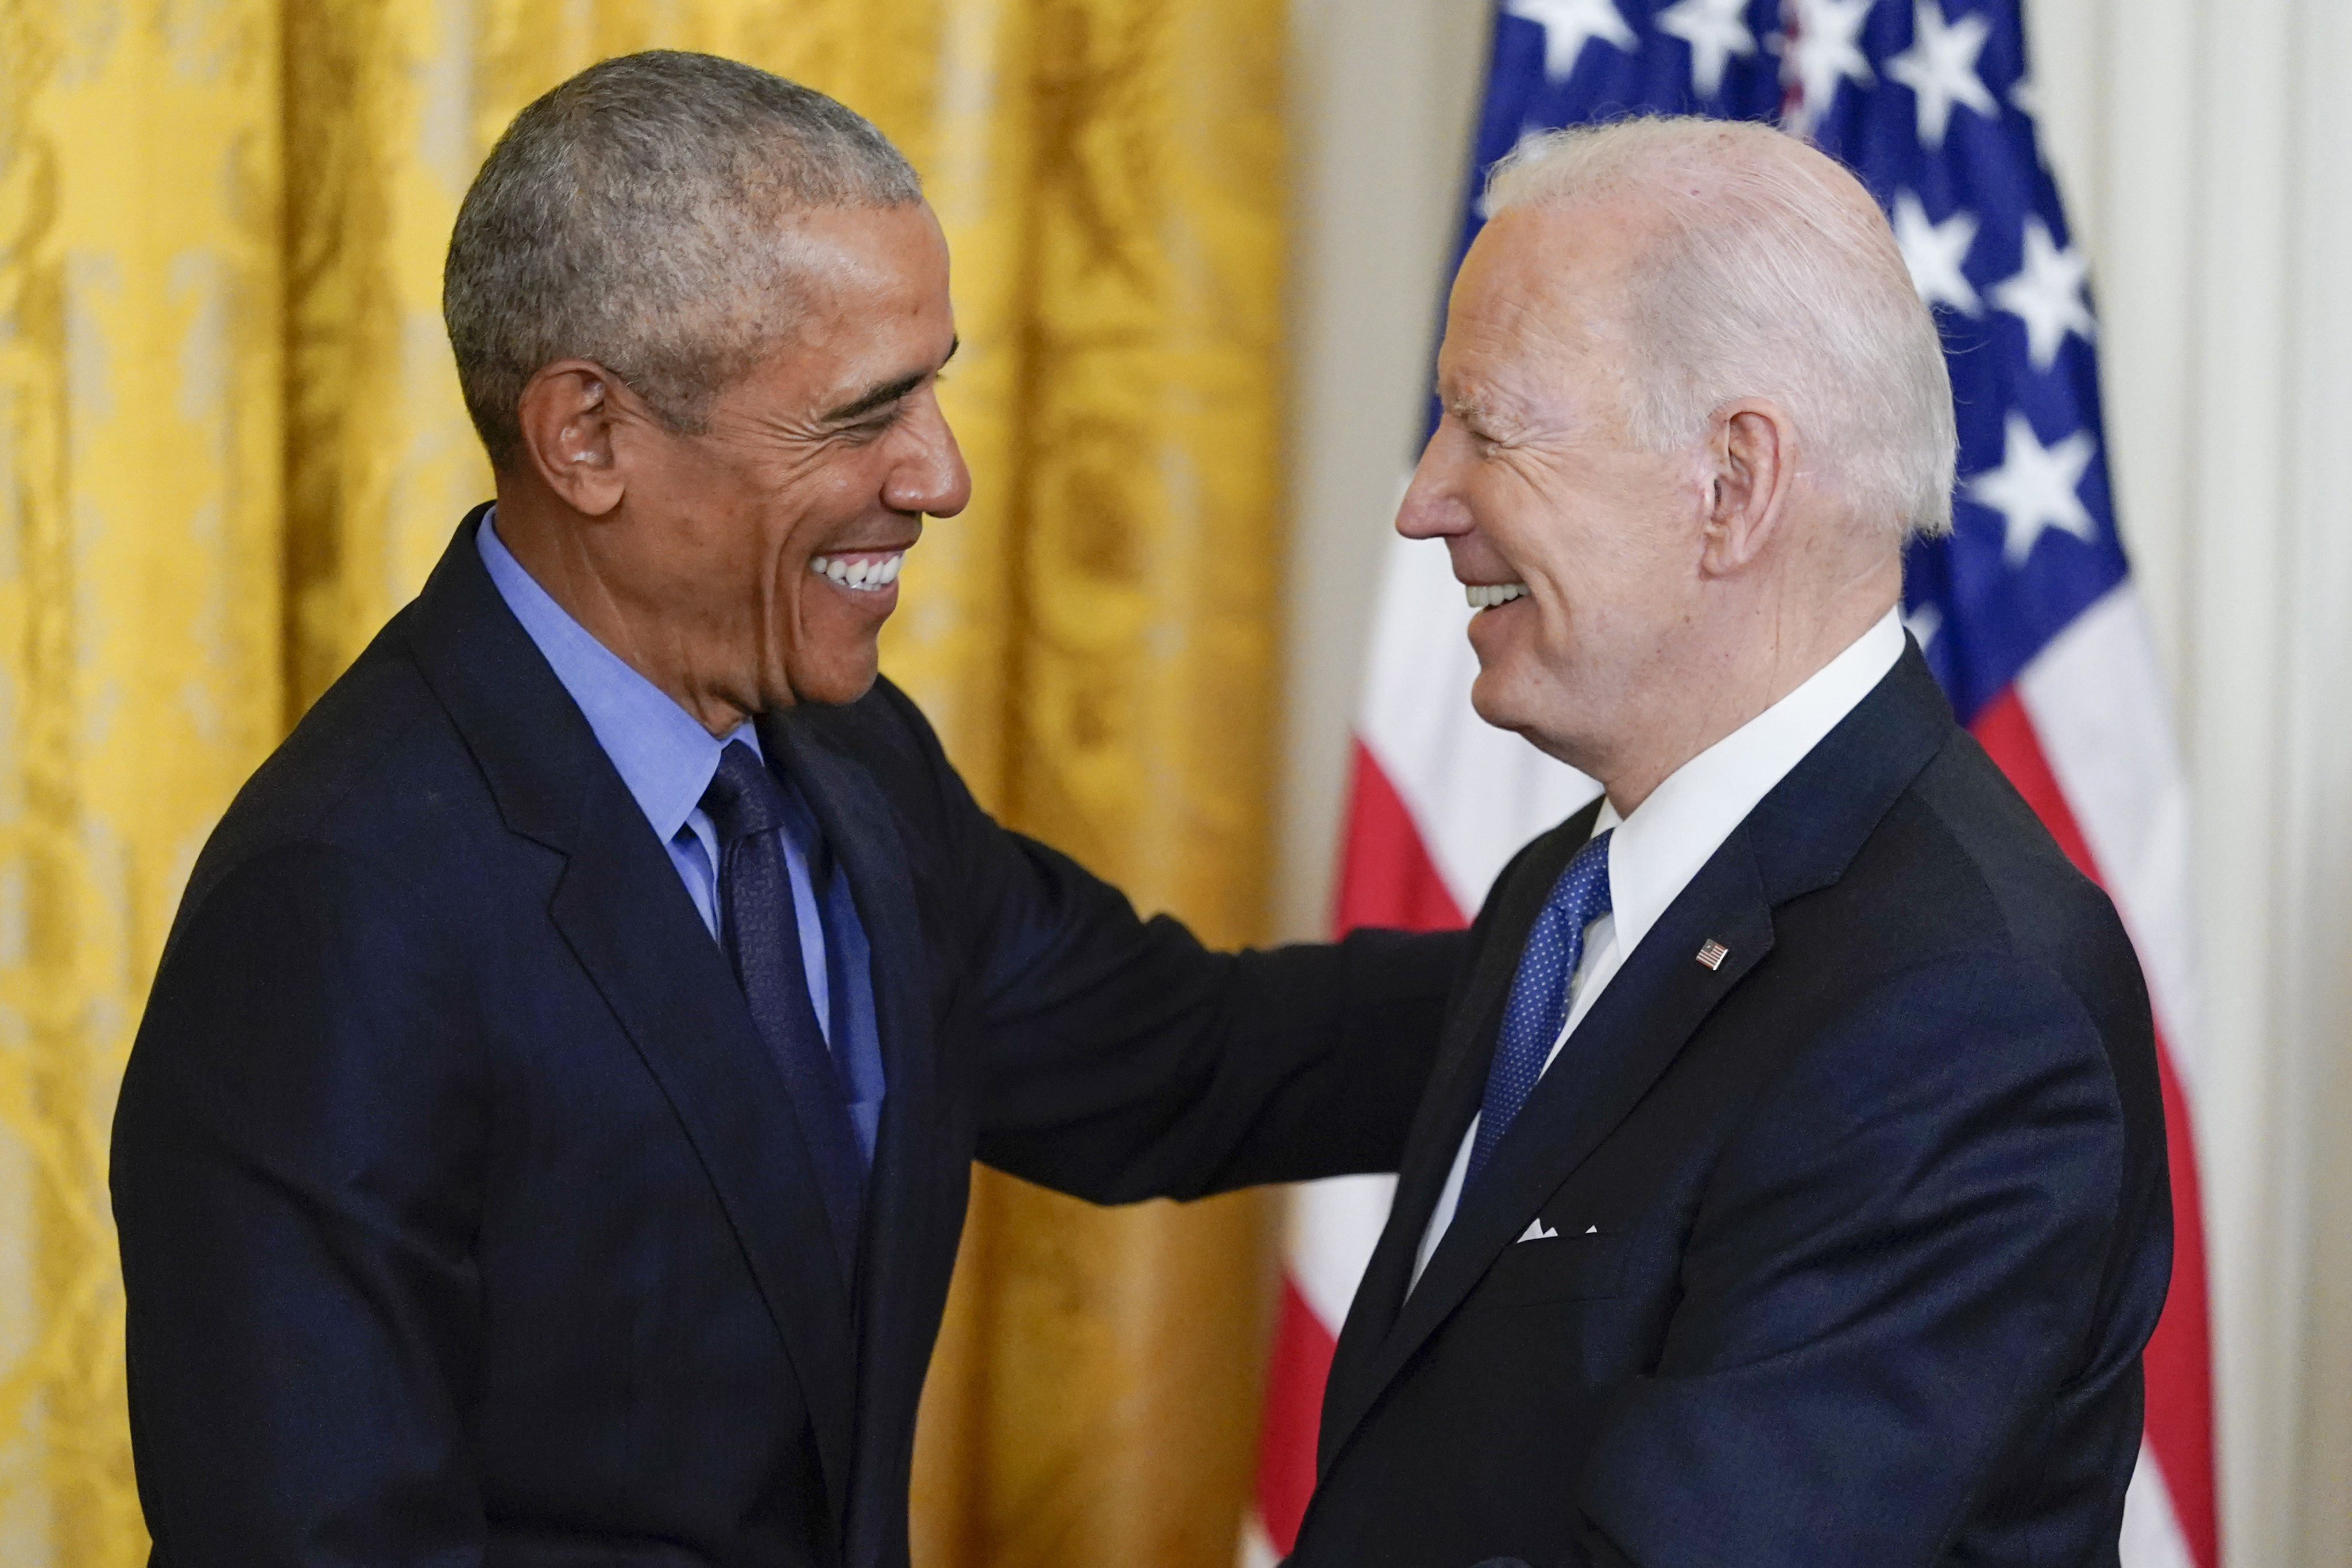 Barack Obama returns to White House, as Joe Biden strengthens Affordable  Care Act | South China Morning Post